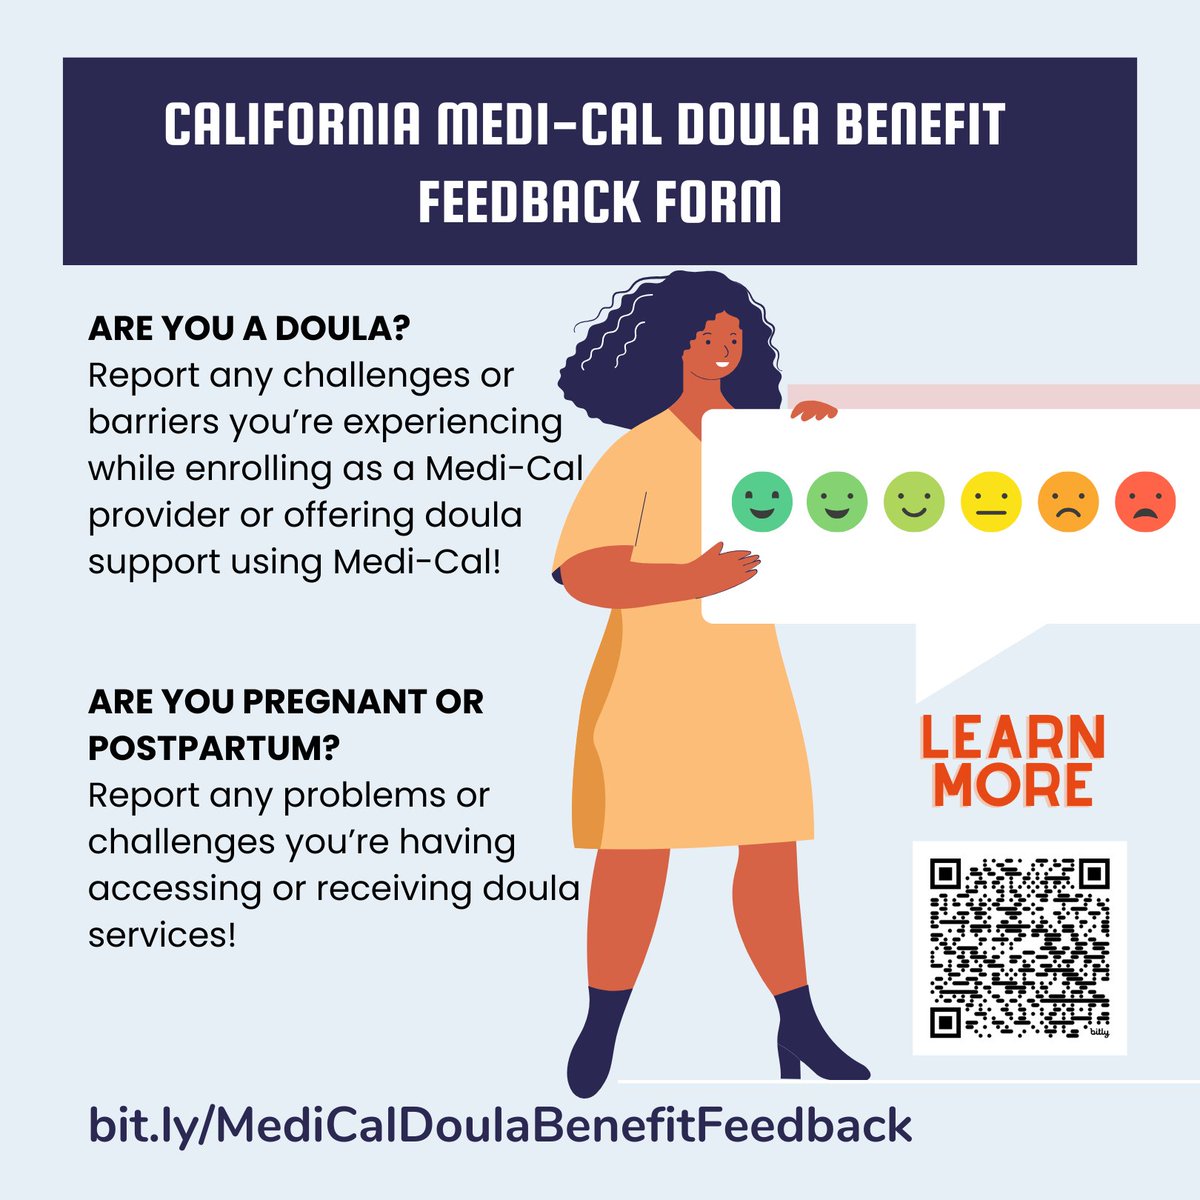 Are you a doula enrolling or serving as a Medi-Cal provider? We want to hear about any barriers or challenges you’re facing - share how it’s going here: bit.ly/MediCalDoulaBe…